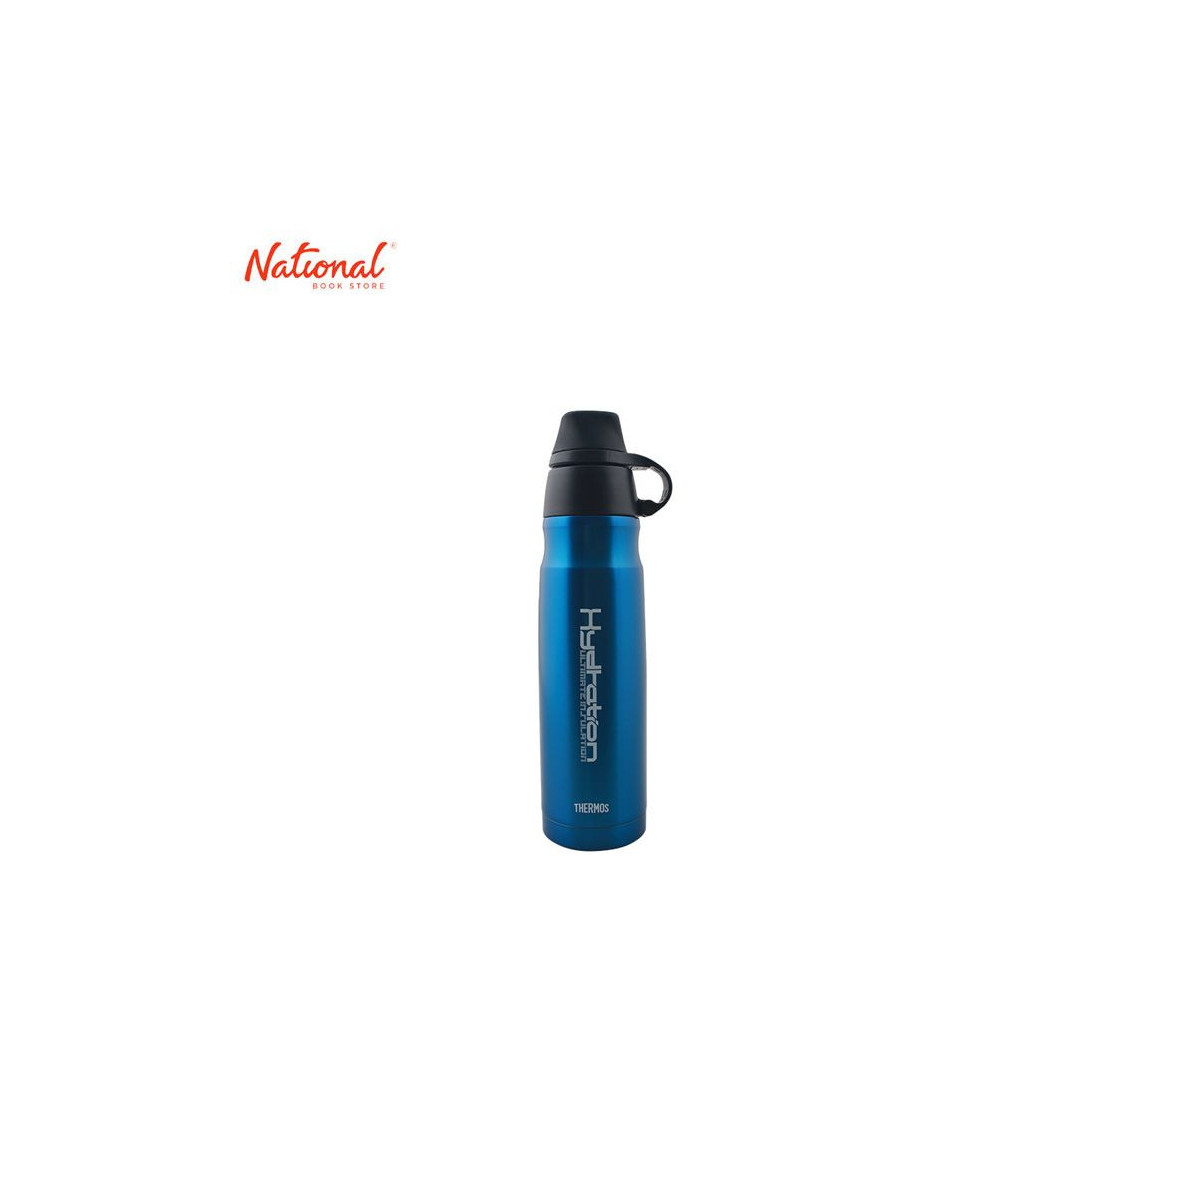 Thermos Thumber FFD-500 Aluminum 50ml (color may vary) - Gift Suggestions